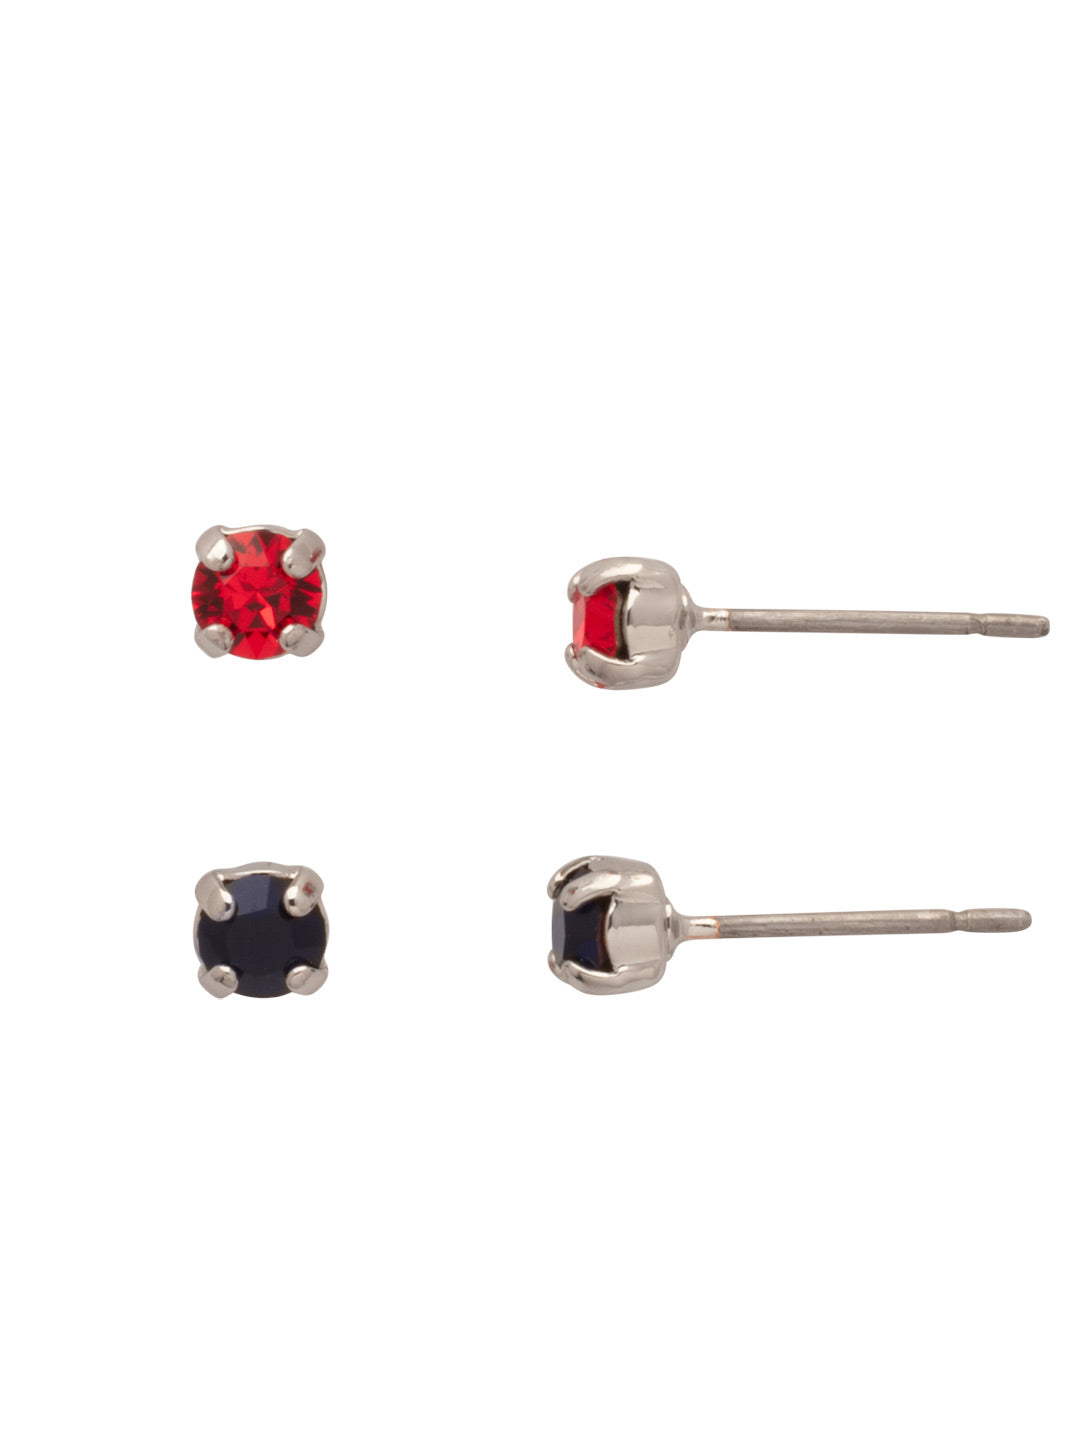 June Set Stud Earrings - EFM6PDBTB - <p>The June Set Stud Earrings feature two pairs of round-cut crystal studs. From Sorrelli's Battle Blue collection in our Palladium finish.</p>